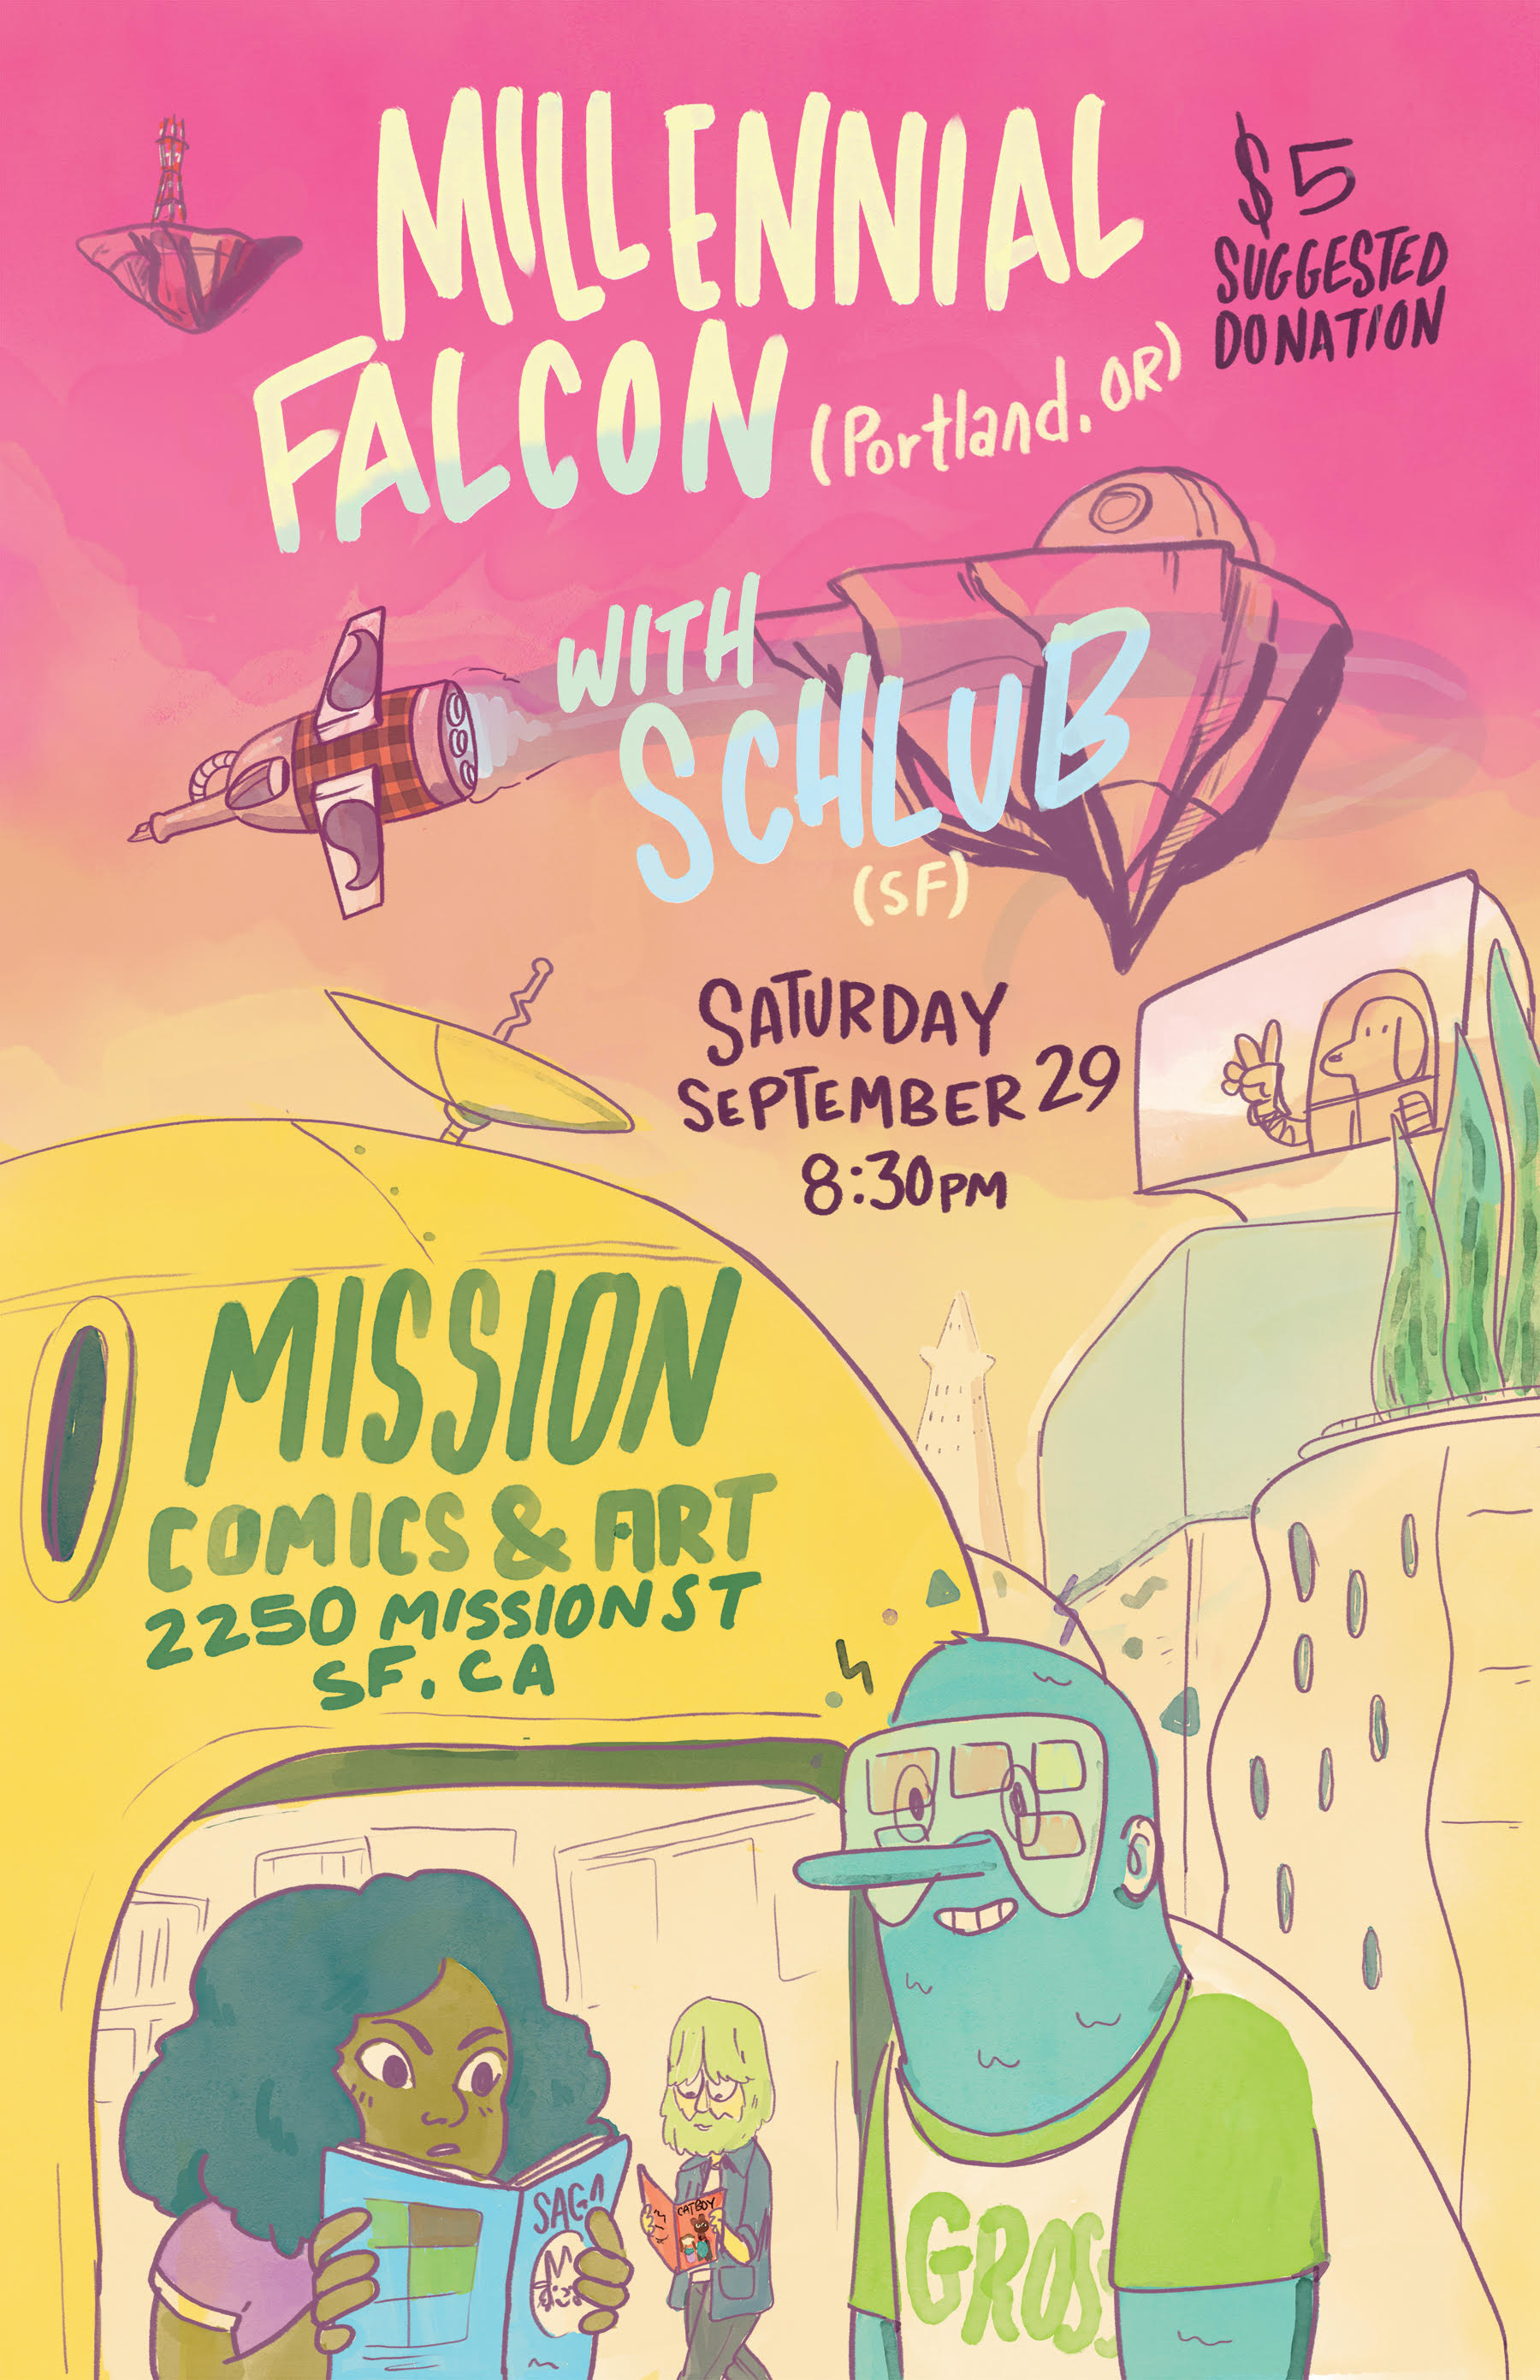 Show Poster for Millennial Falcon and Schlub